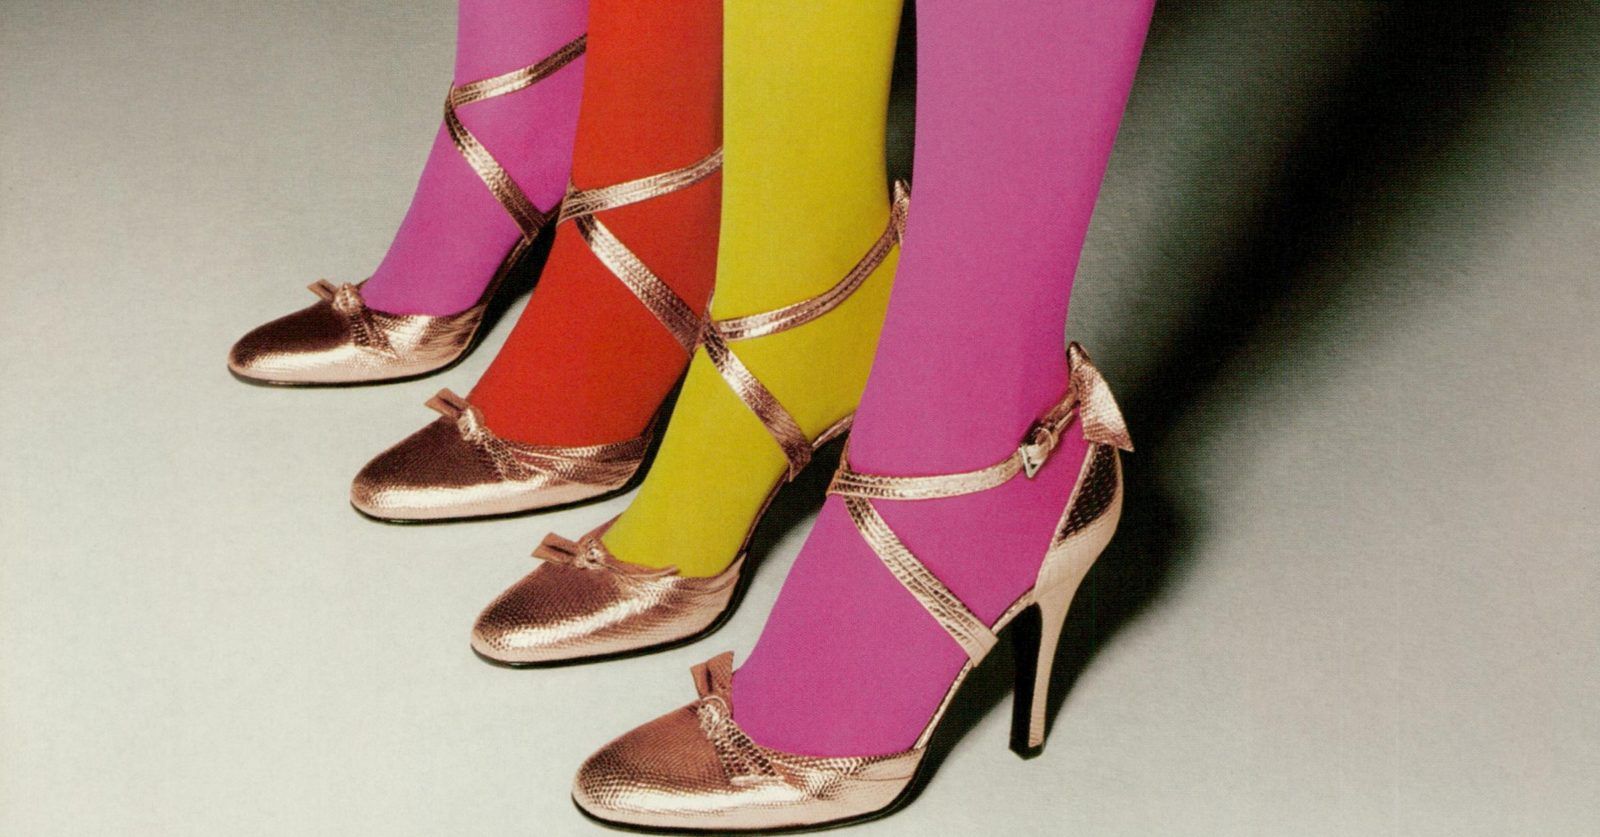 A look at Sergio Rossi's most iconic shoes from the 1960s to the 1990s